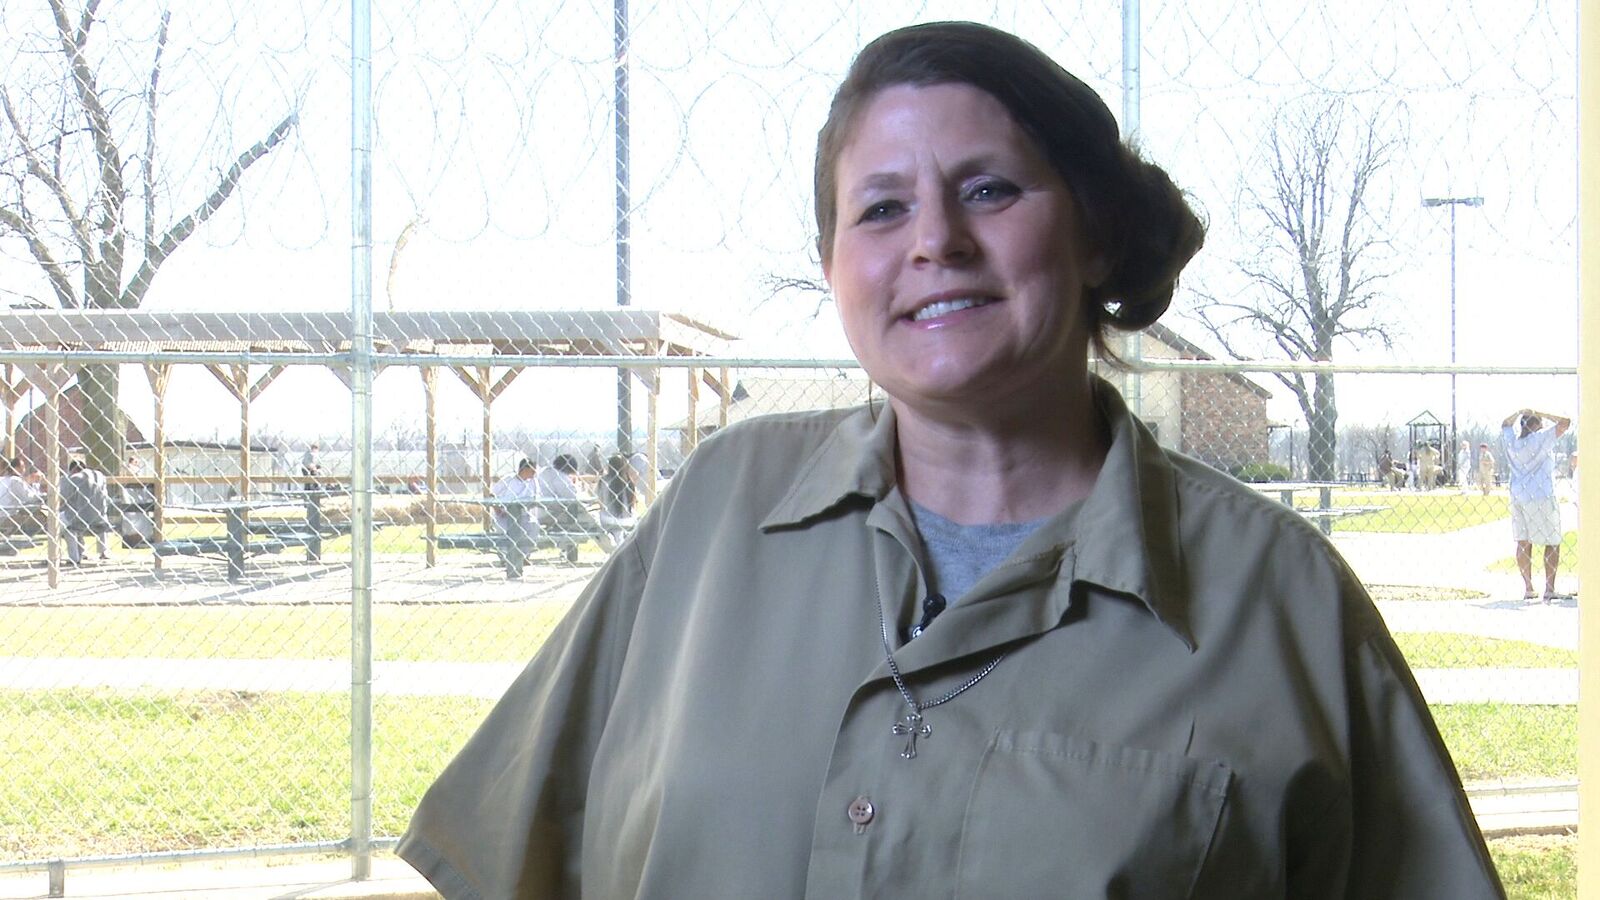 Kim learned to grow up in Christ thanks to the Prison Fellowship Academy